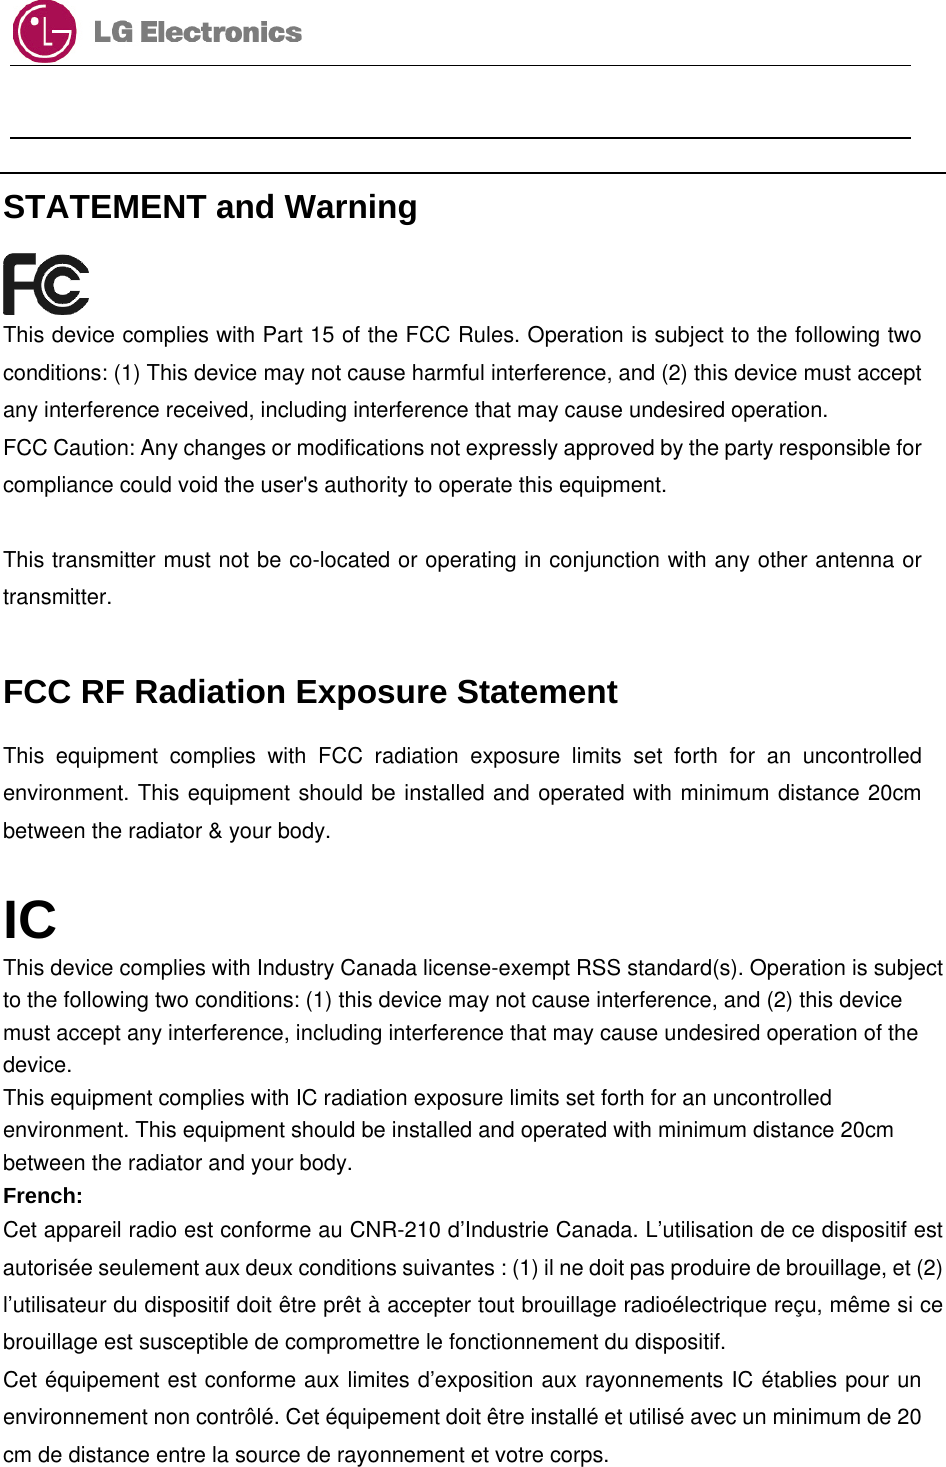                                        STATEMENT and Warning  This device complies with Part 15 of the FCC Rules. Operation is subject to the following two conditions: (1) This device may not cause harmful interference, and (2) this device must accept any interference received, including interference that may cause undesired operation. FCC Caution: Any changes or modifications not expressly approved by the party responsible for compliance could void the user&apos;s authority to operate this equipment.   This transmitter must not be co-located or operating in conjunction with any other antenna or transmitter.  FCC RF Radiation Exposure Statement This equipment complies with FCC radiation exposure limits set forth for an uncontrolled environment. This equipment should be installed and operated with minimum distance 20cm between the radiator &amp; your body.  IC This device complies with Industry Canada license-exempt RSS standard(s). Operation is subject to the following two conditions: (1) this device may not cause interference, and (2) this device must accept any interference, including interference that may cause undesired operation of the device. This equipment complies with IC radiation exposure limits set forth for an uncontrolled environment. This equipment should be installed and operated with minimum distance 20cm between the radiator and your body. French: Cet appareil radio est conforme au CNR-210 d’Industrie Canada. L’utilisation de ce dispositif est autorisée seulement aux deux conditions suivantes : (1) il ne doit pas produire de brouillage, et (2) l’utilisateur du dispositif doit être prêt à accepter tout brouillage radioélectrique reçu, même si ce brouillage est susceptible de compromettre le fonctionnement du dispositif. Cet équipement est conforme aux limites d’exposition aux rayonnements IC établies pour un environnement non contrôlé. Cet équipement doit être installé et utilisé avec un minimum de 20 cm de distance entre la source de rayonnement et votre corps.  